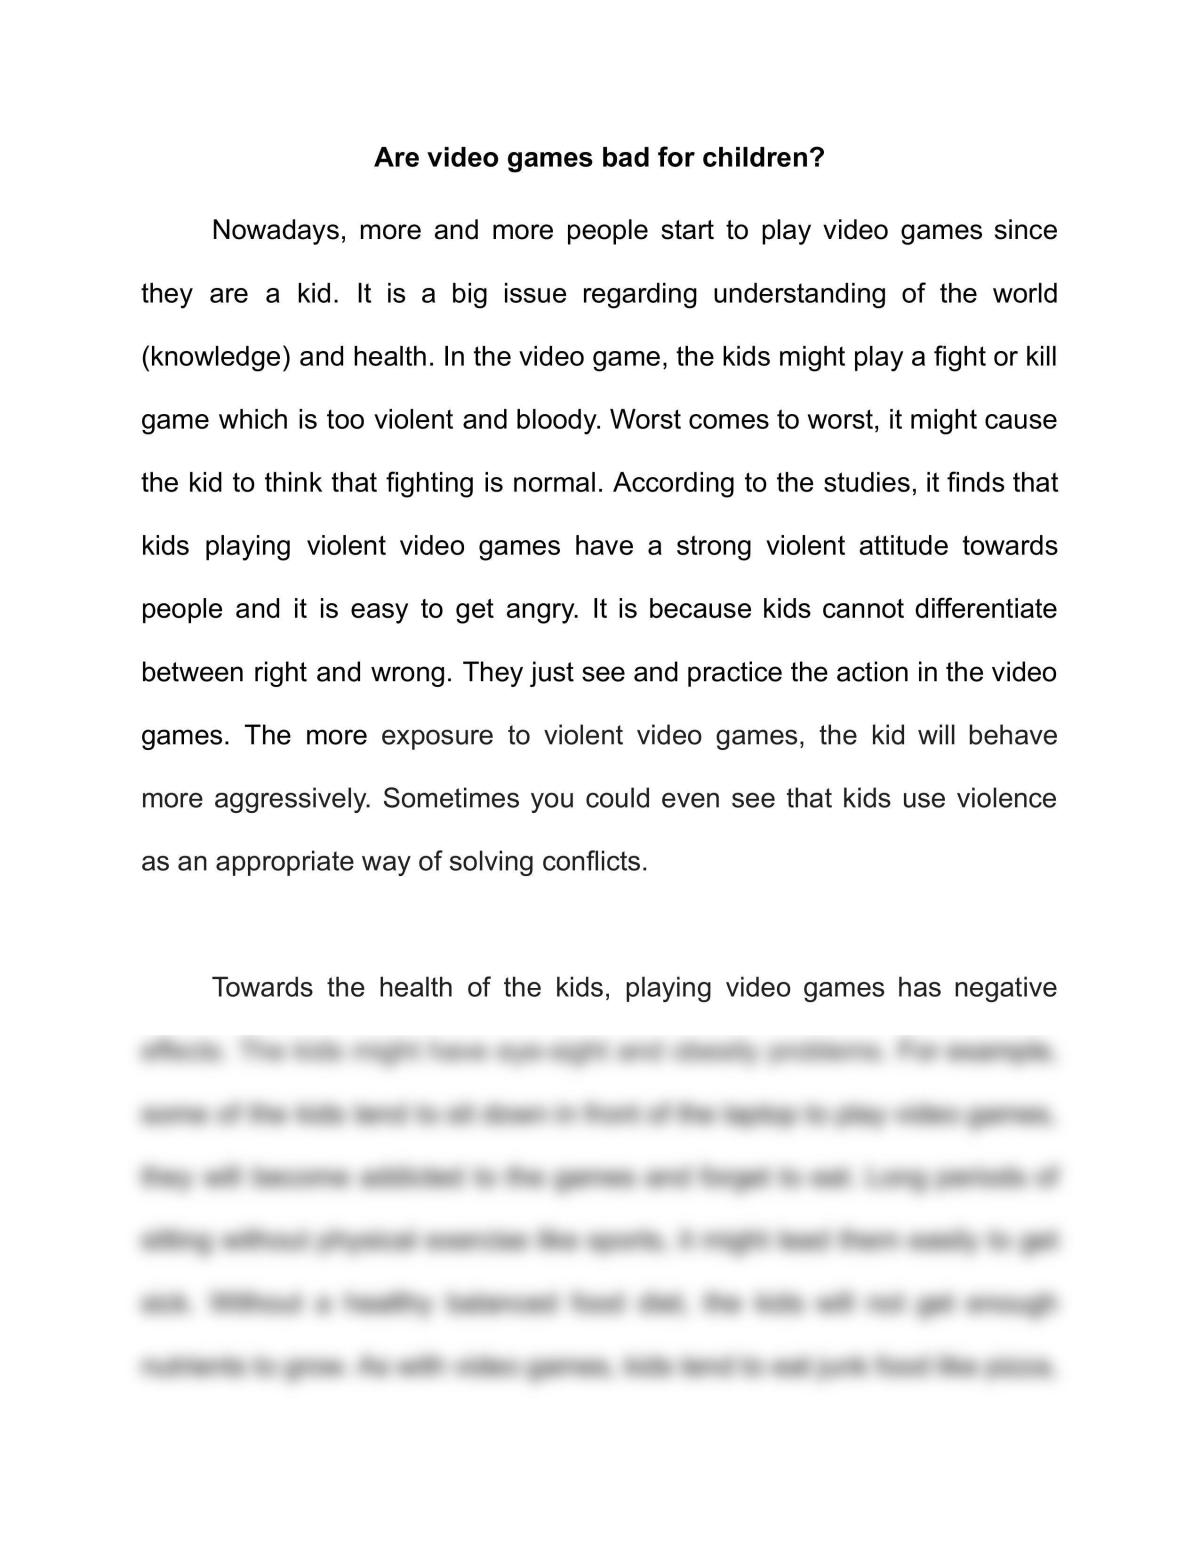 Are Video Games Bad for children? - Page 1